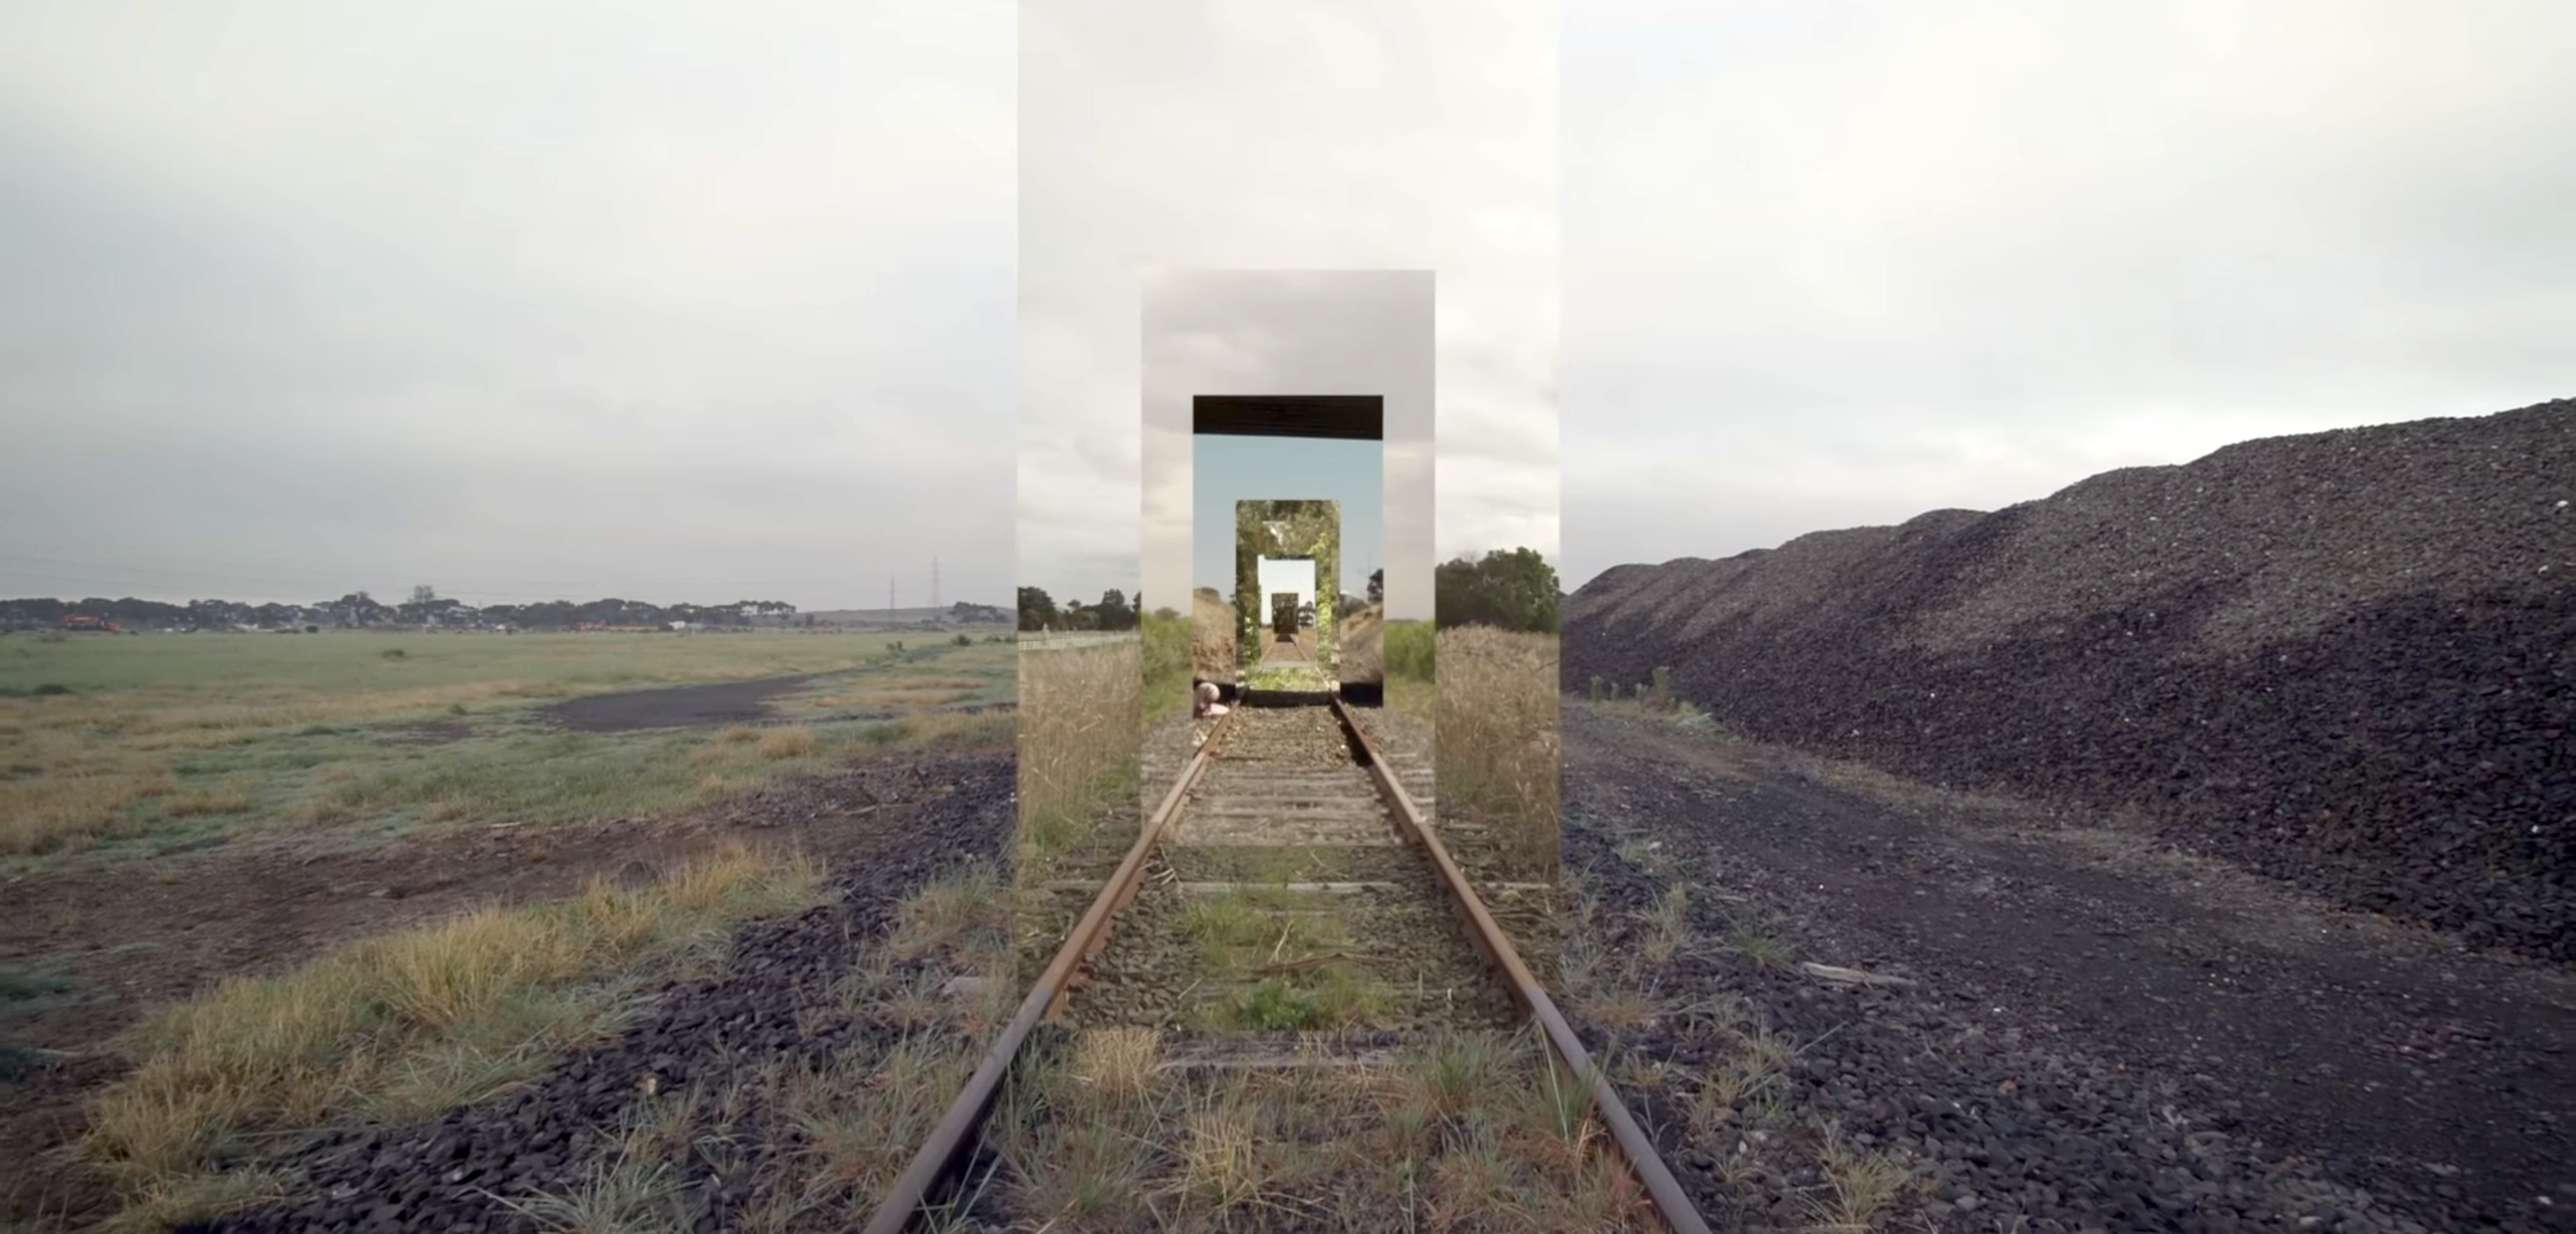 Daniel Crooks – time & space from a different angle